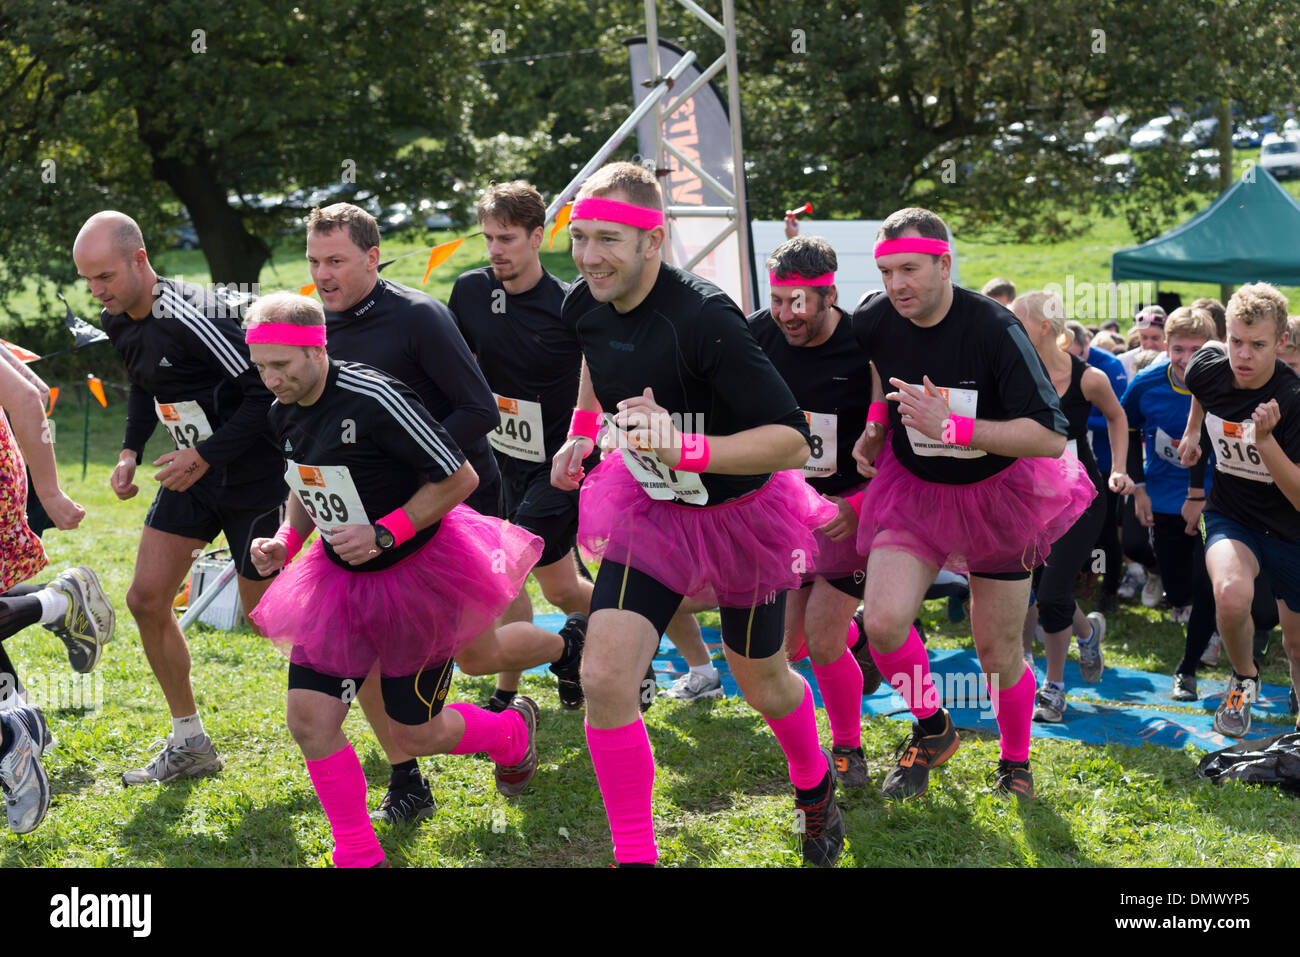 Male competitors dressed in pink skirts wearing head bands at the  starting line of an endurance race in  Derbyshire UK Stock Photo